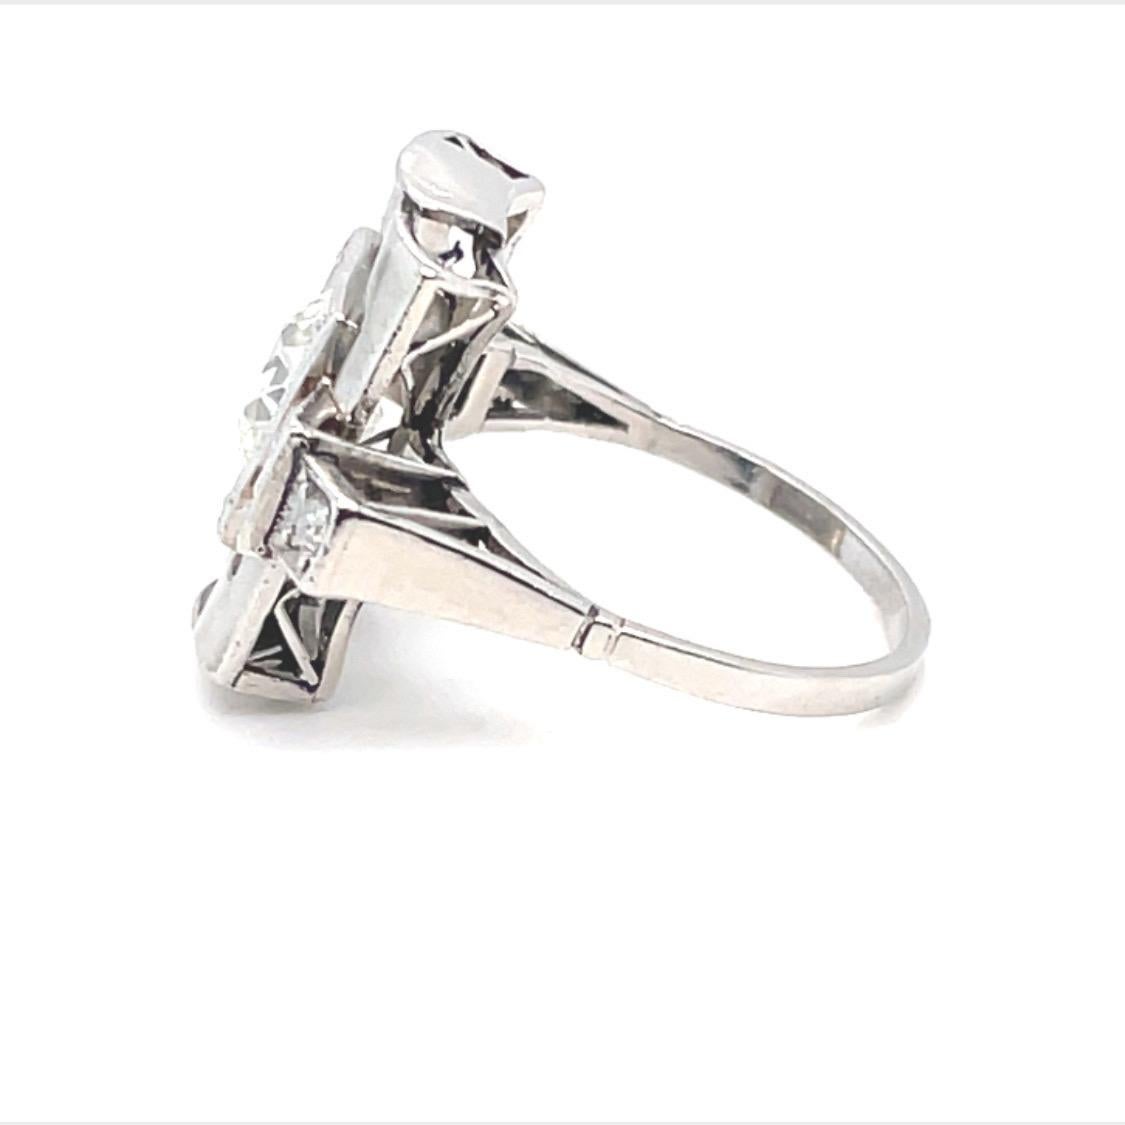 Architectural platinum and diamond Art-Déco ring dating circa 1925.

Art-Déco ring of open-work, geometric design, centering upon 1 old European cut diamond of circa 1.4 carats, in mille-grain setting, flanked by two circular- and two single-cut